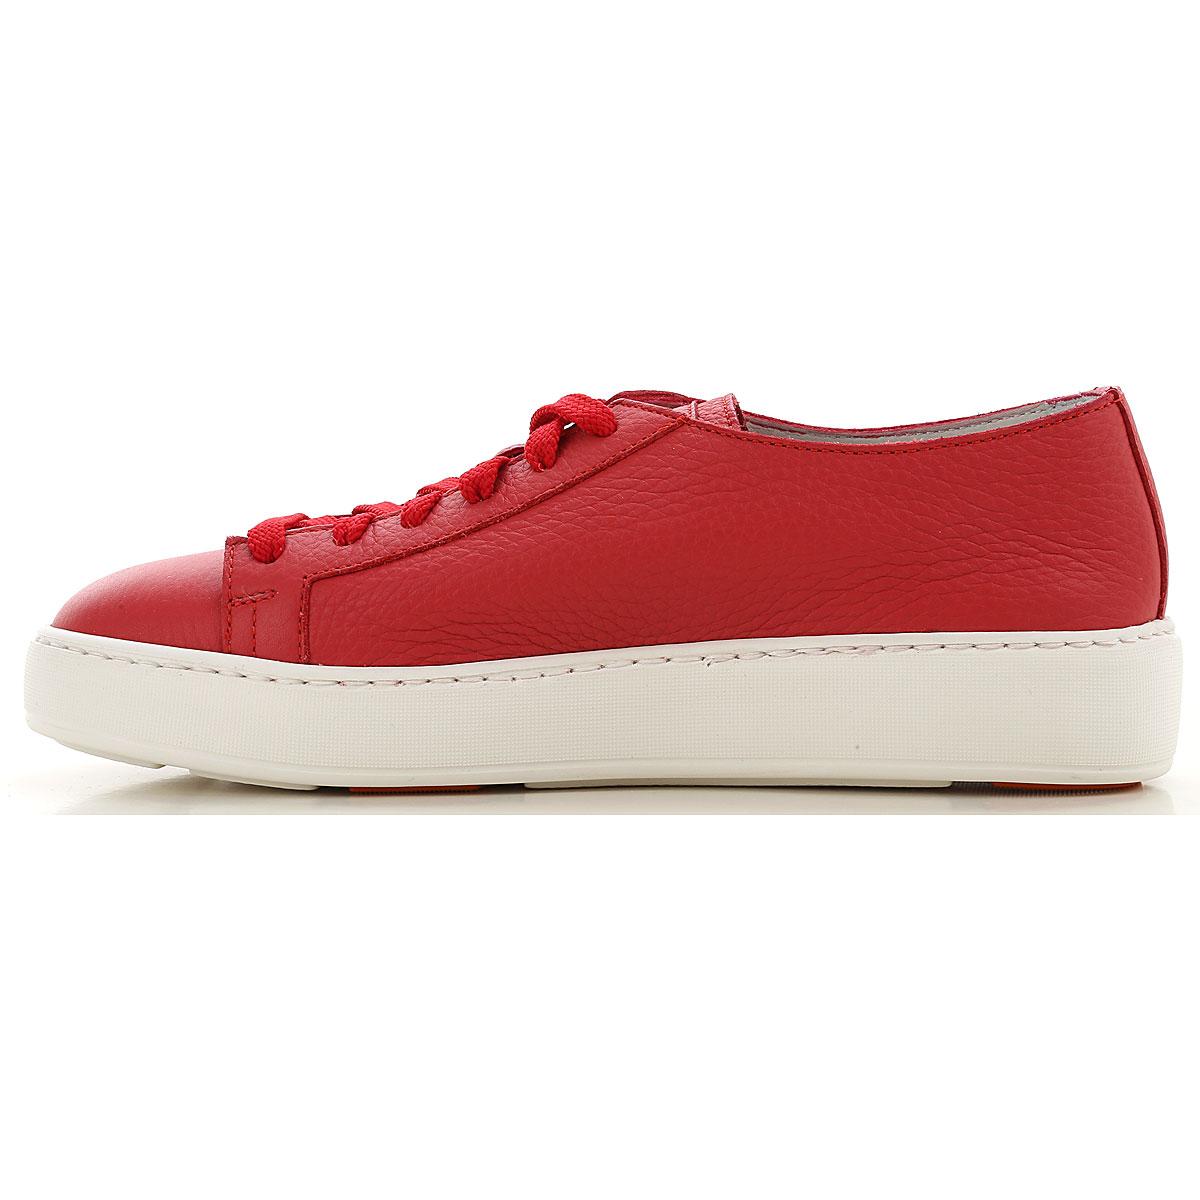 Santoni Shoes For Women in Red - Lyst